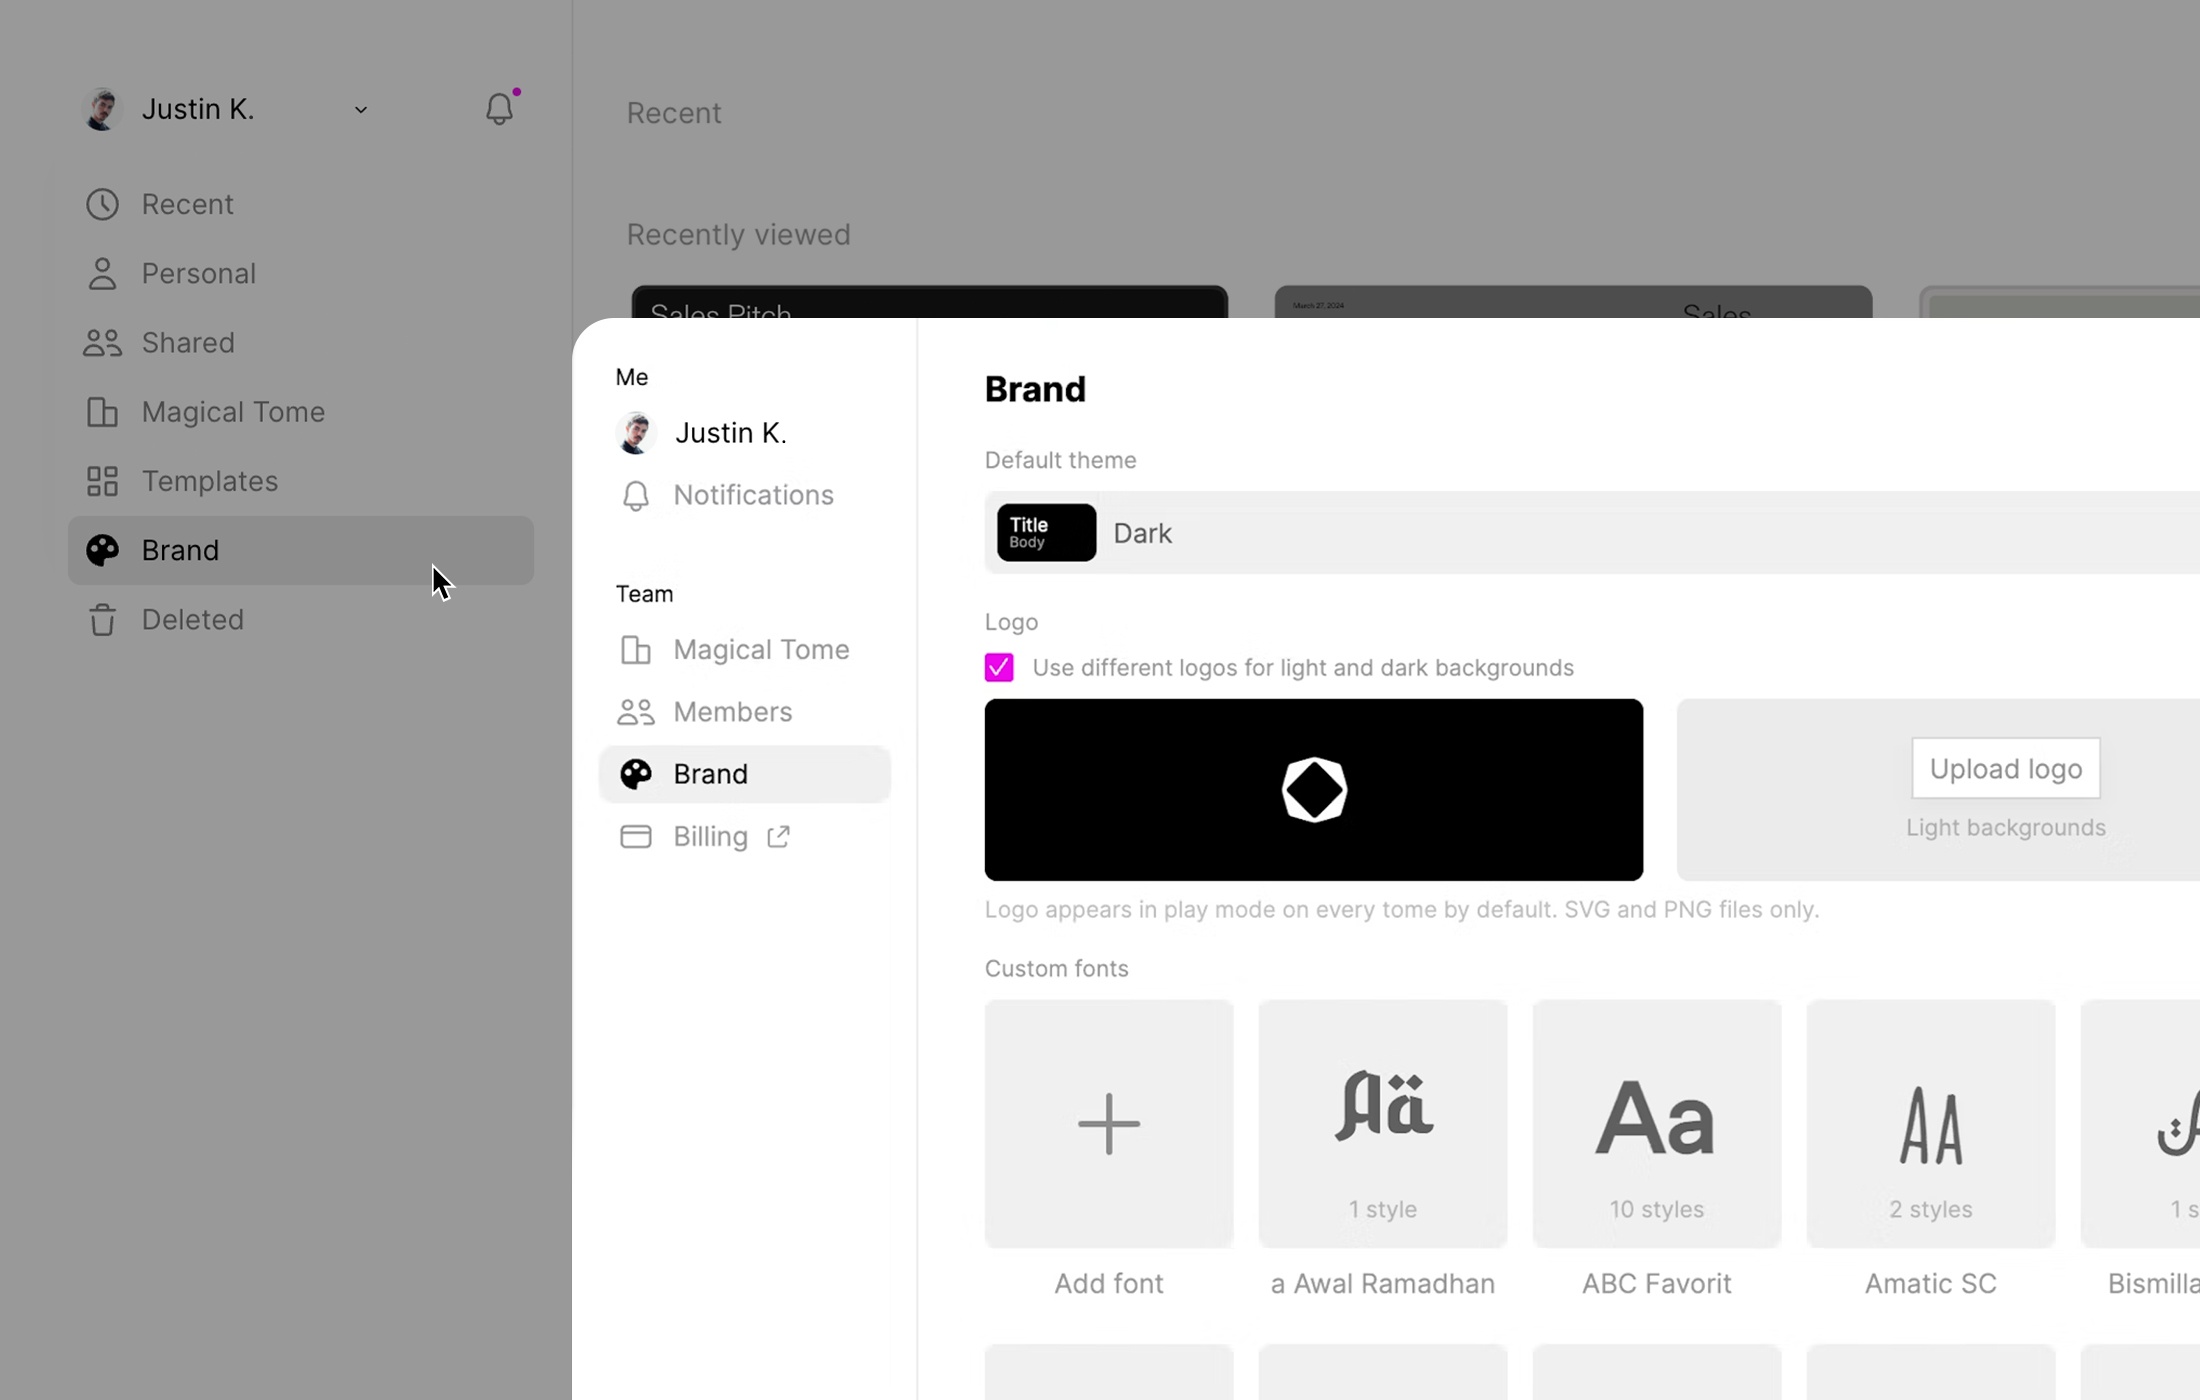 Visit the brand settings page to upload logos and custom fonts, or set your default presentation theme